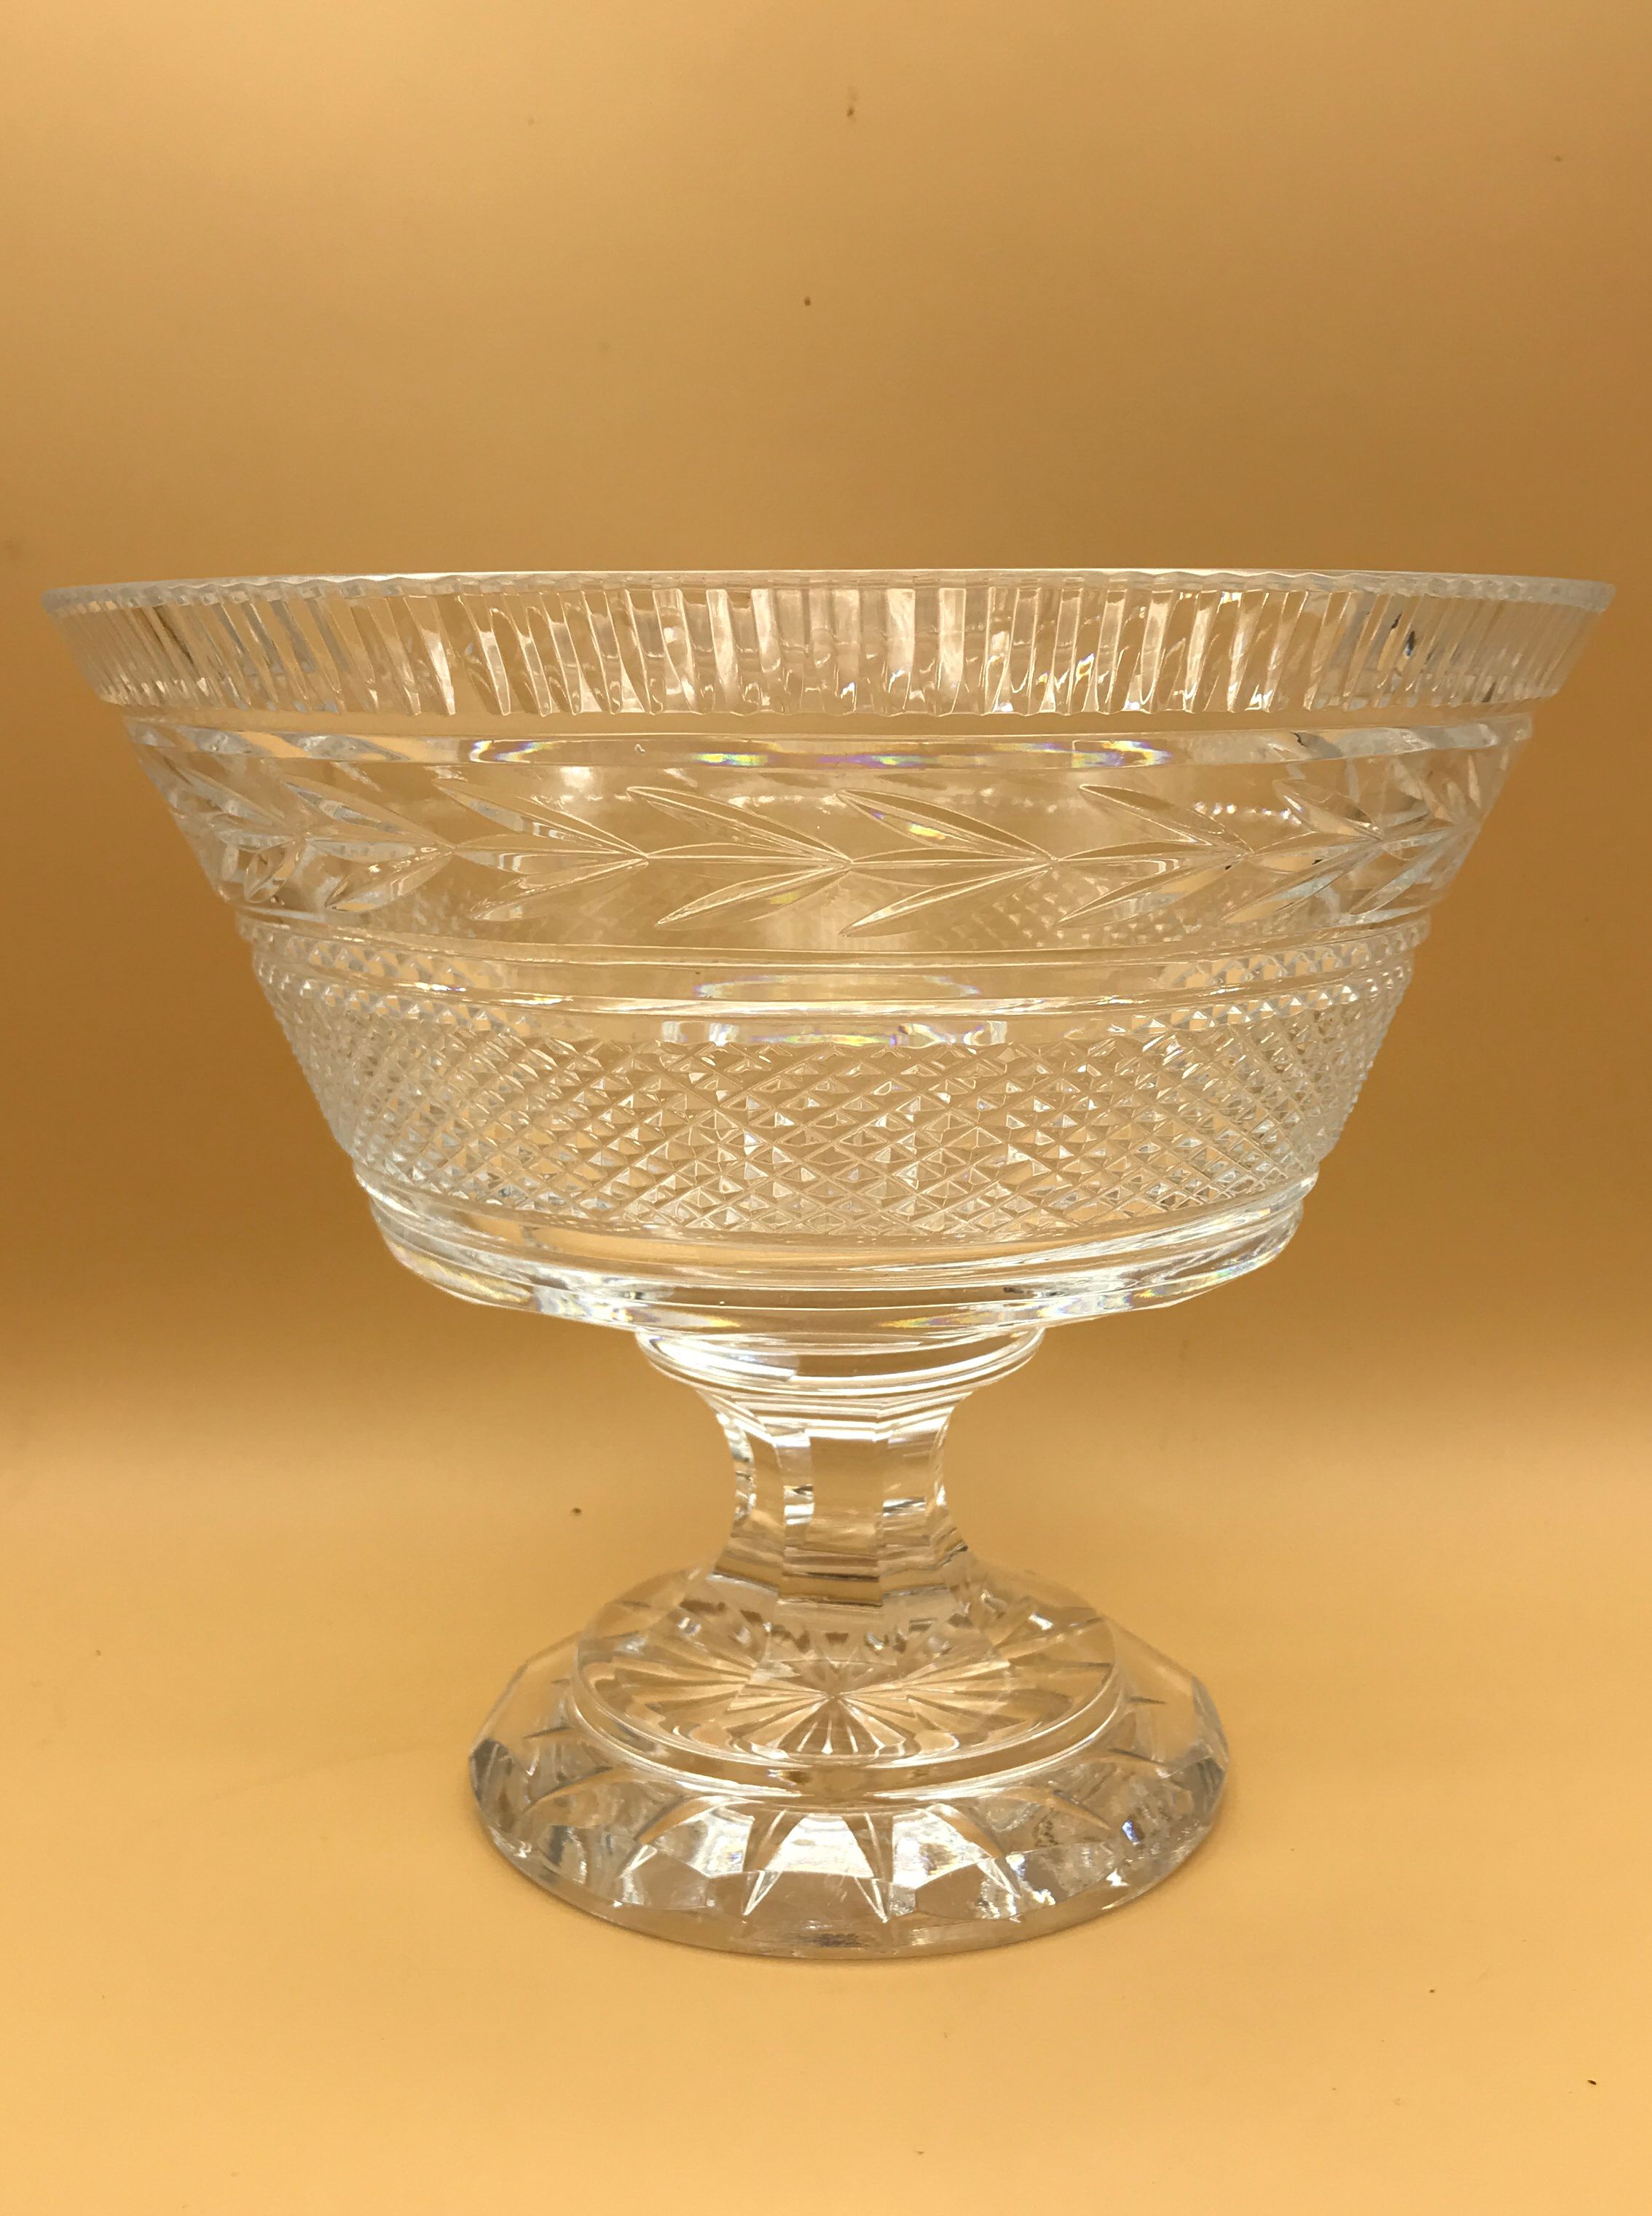 LOVELY LARGE WATERFORD CRYSTAL GLANDORE PATTERN FRUIT BOWL - HOME DECOR